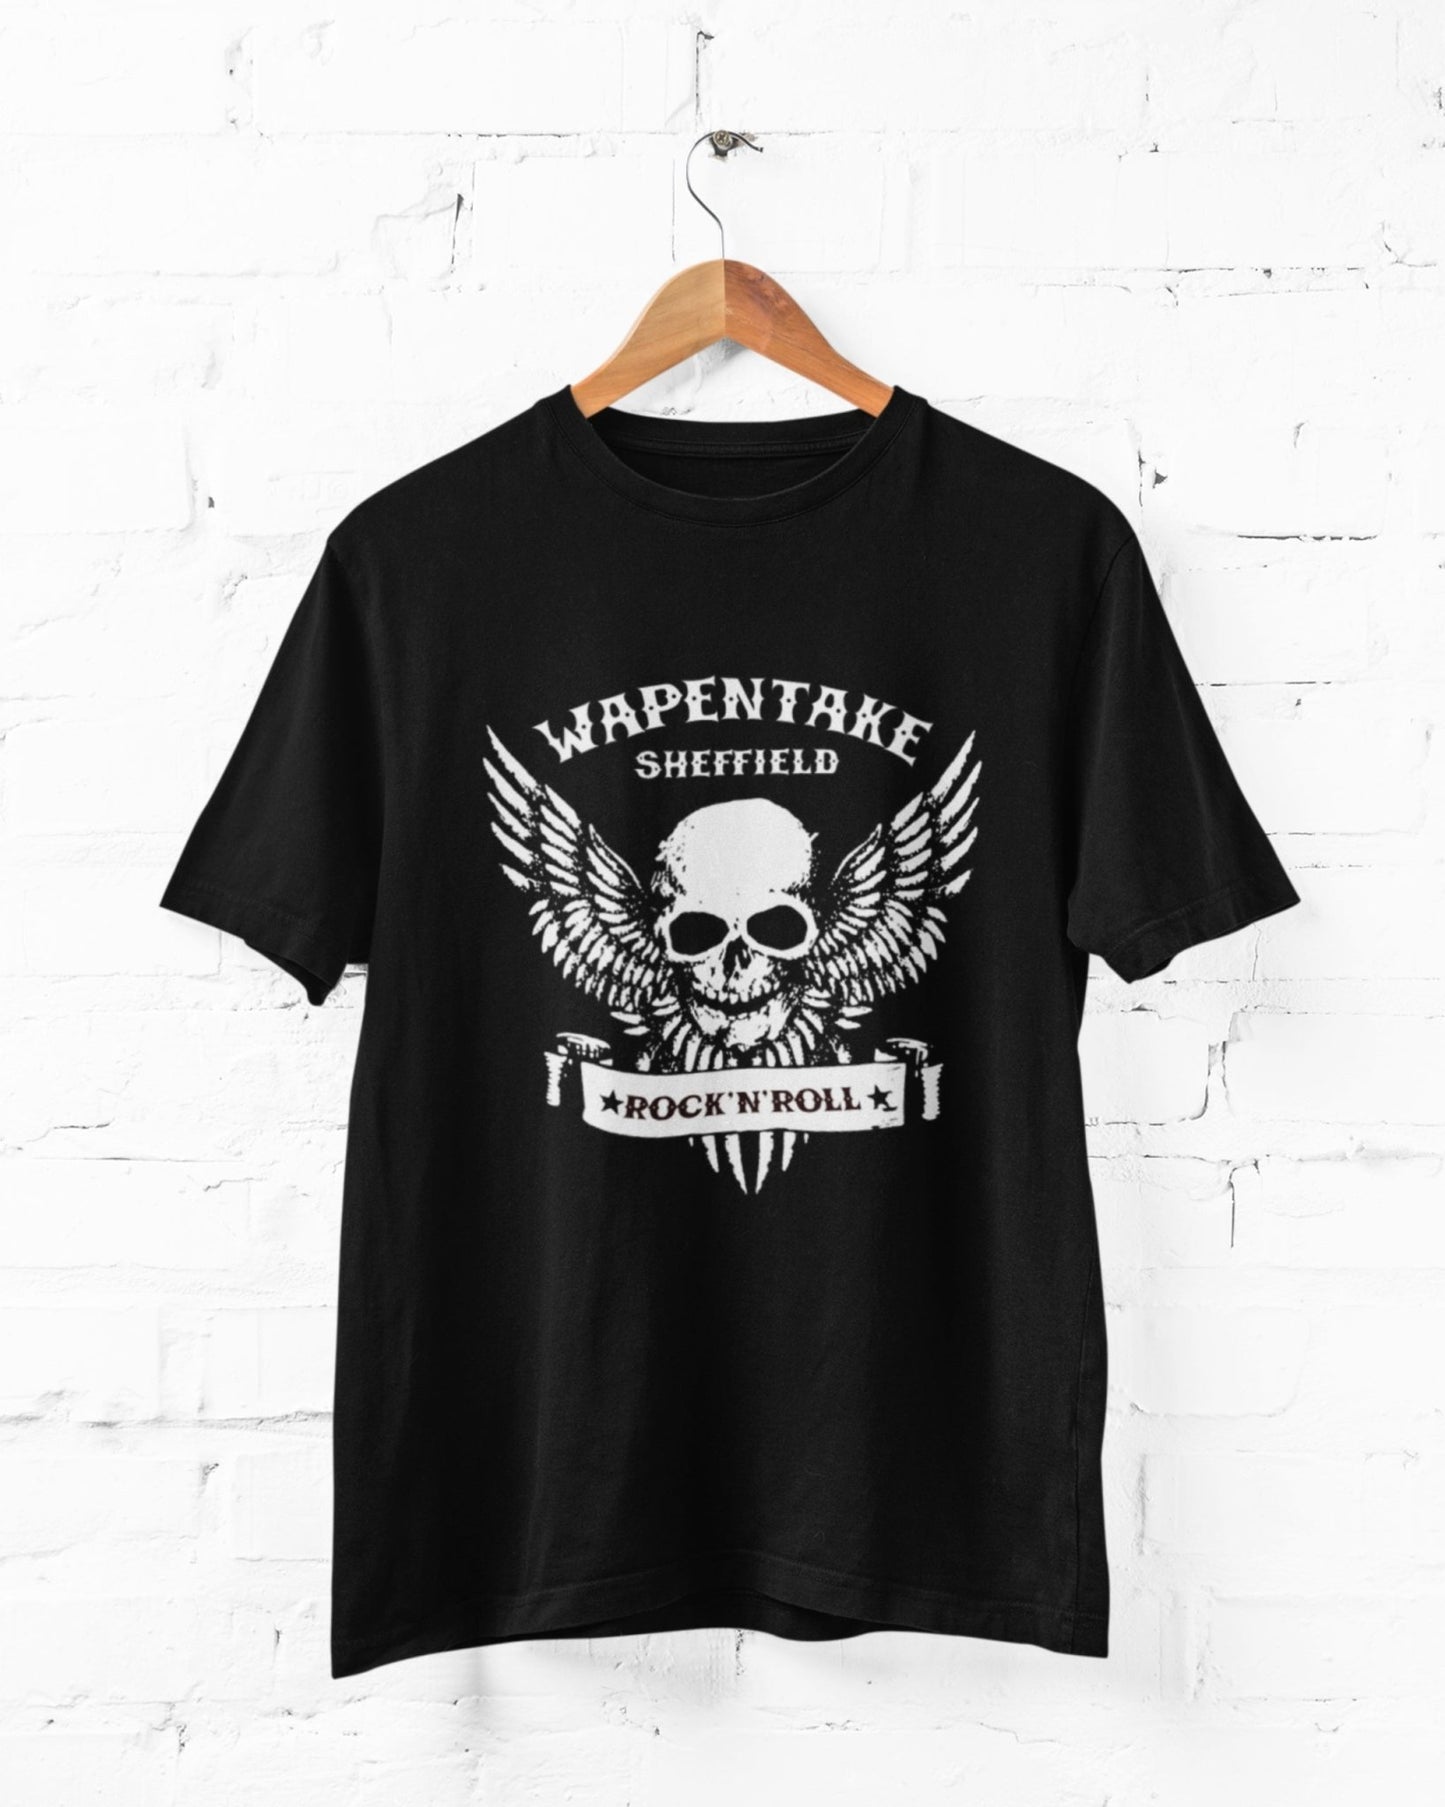 Wapentake skull/wings unisex fit T-shirt - re-discover your inner rock star - Dirty Stop Outs